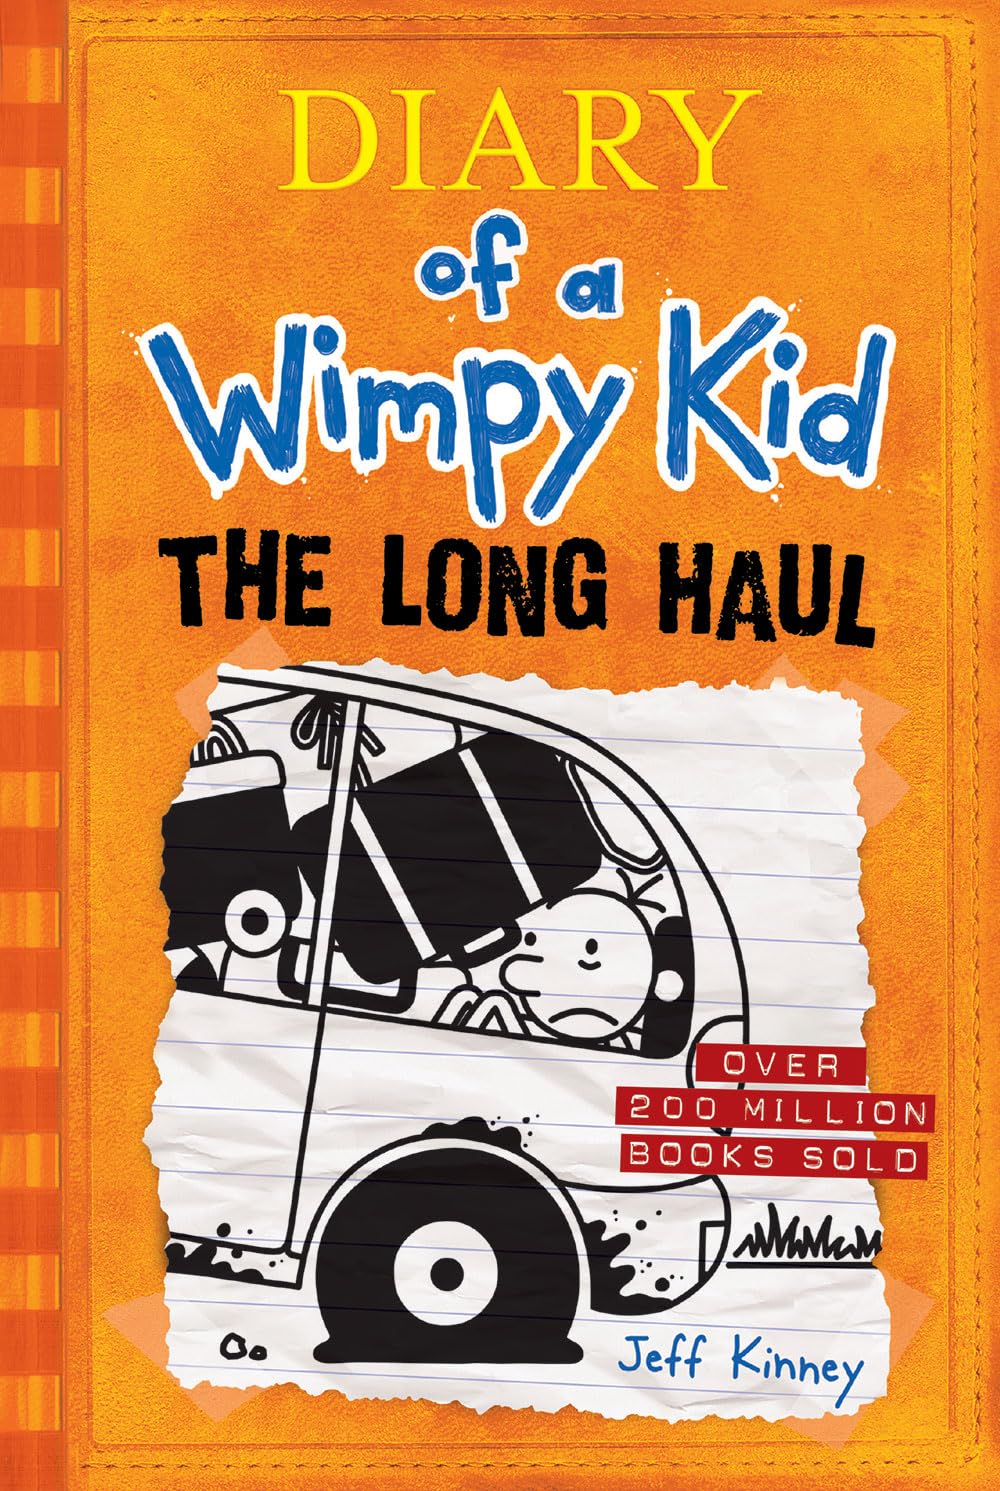 DIARY OF A WIMPY: THE LONG HAUL